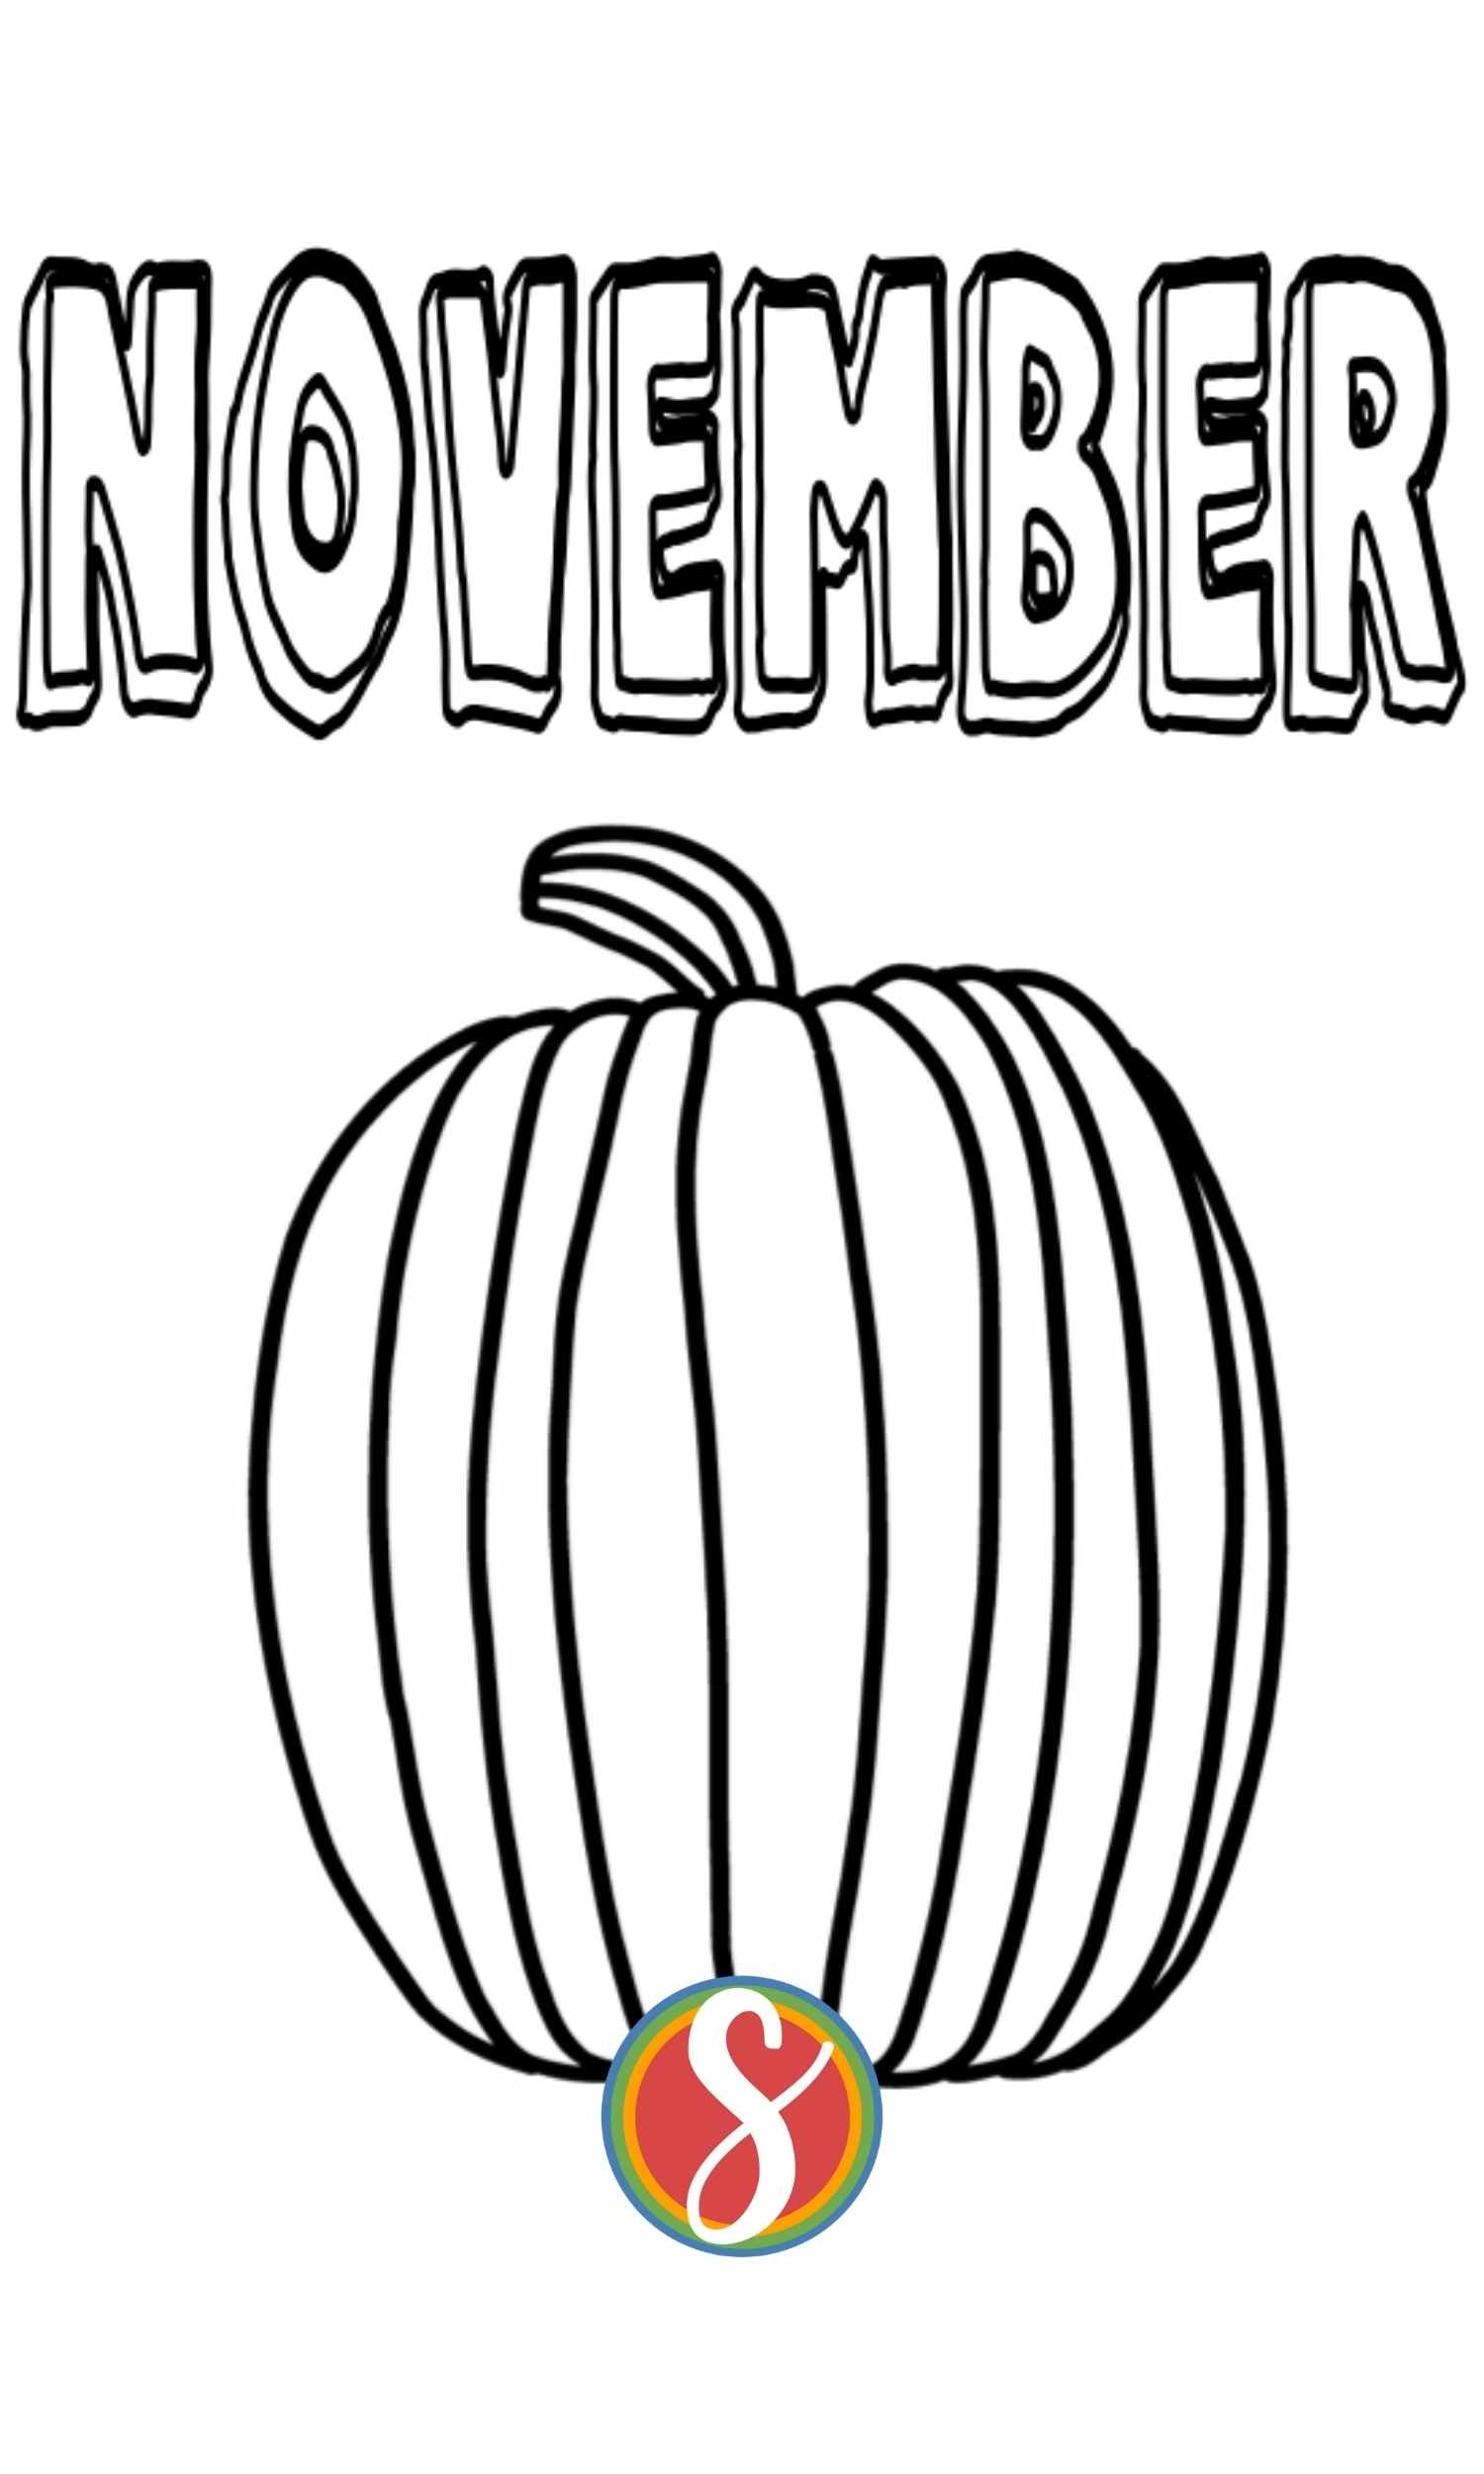 Fall, Free Coloring Pages